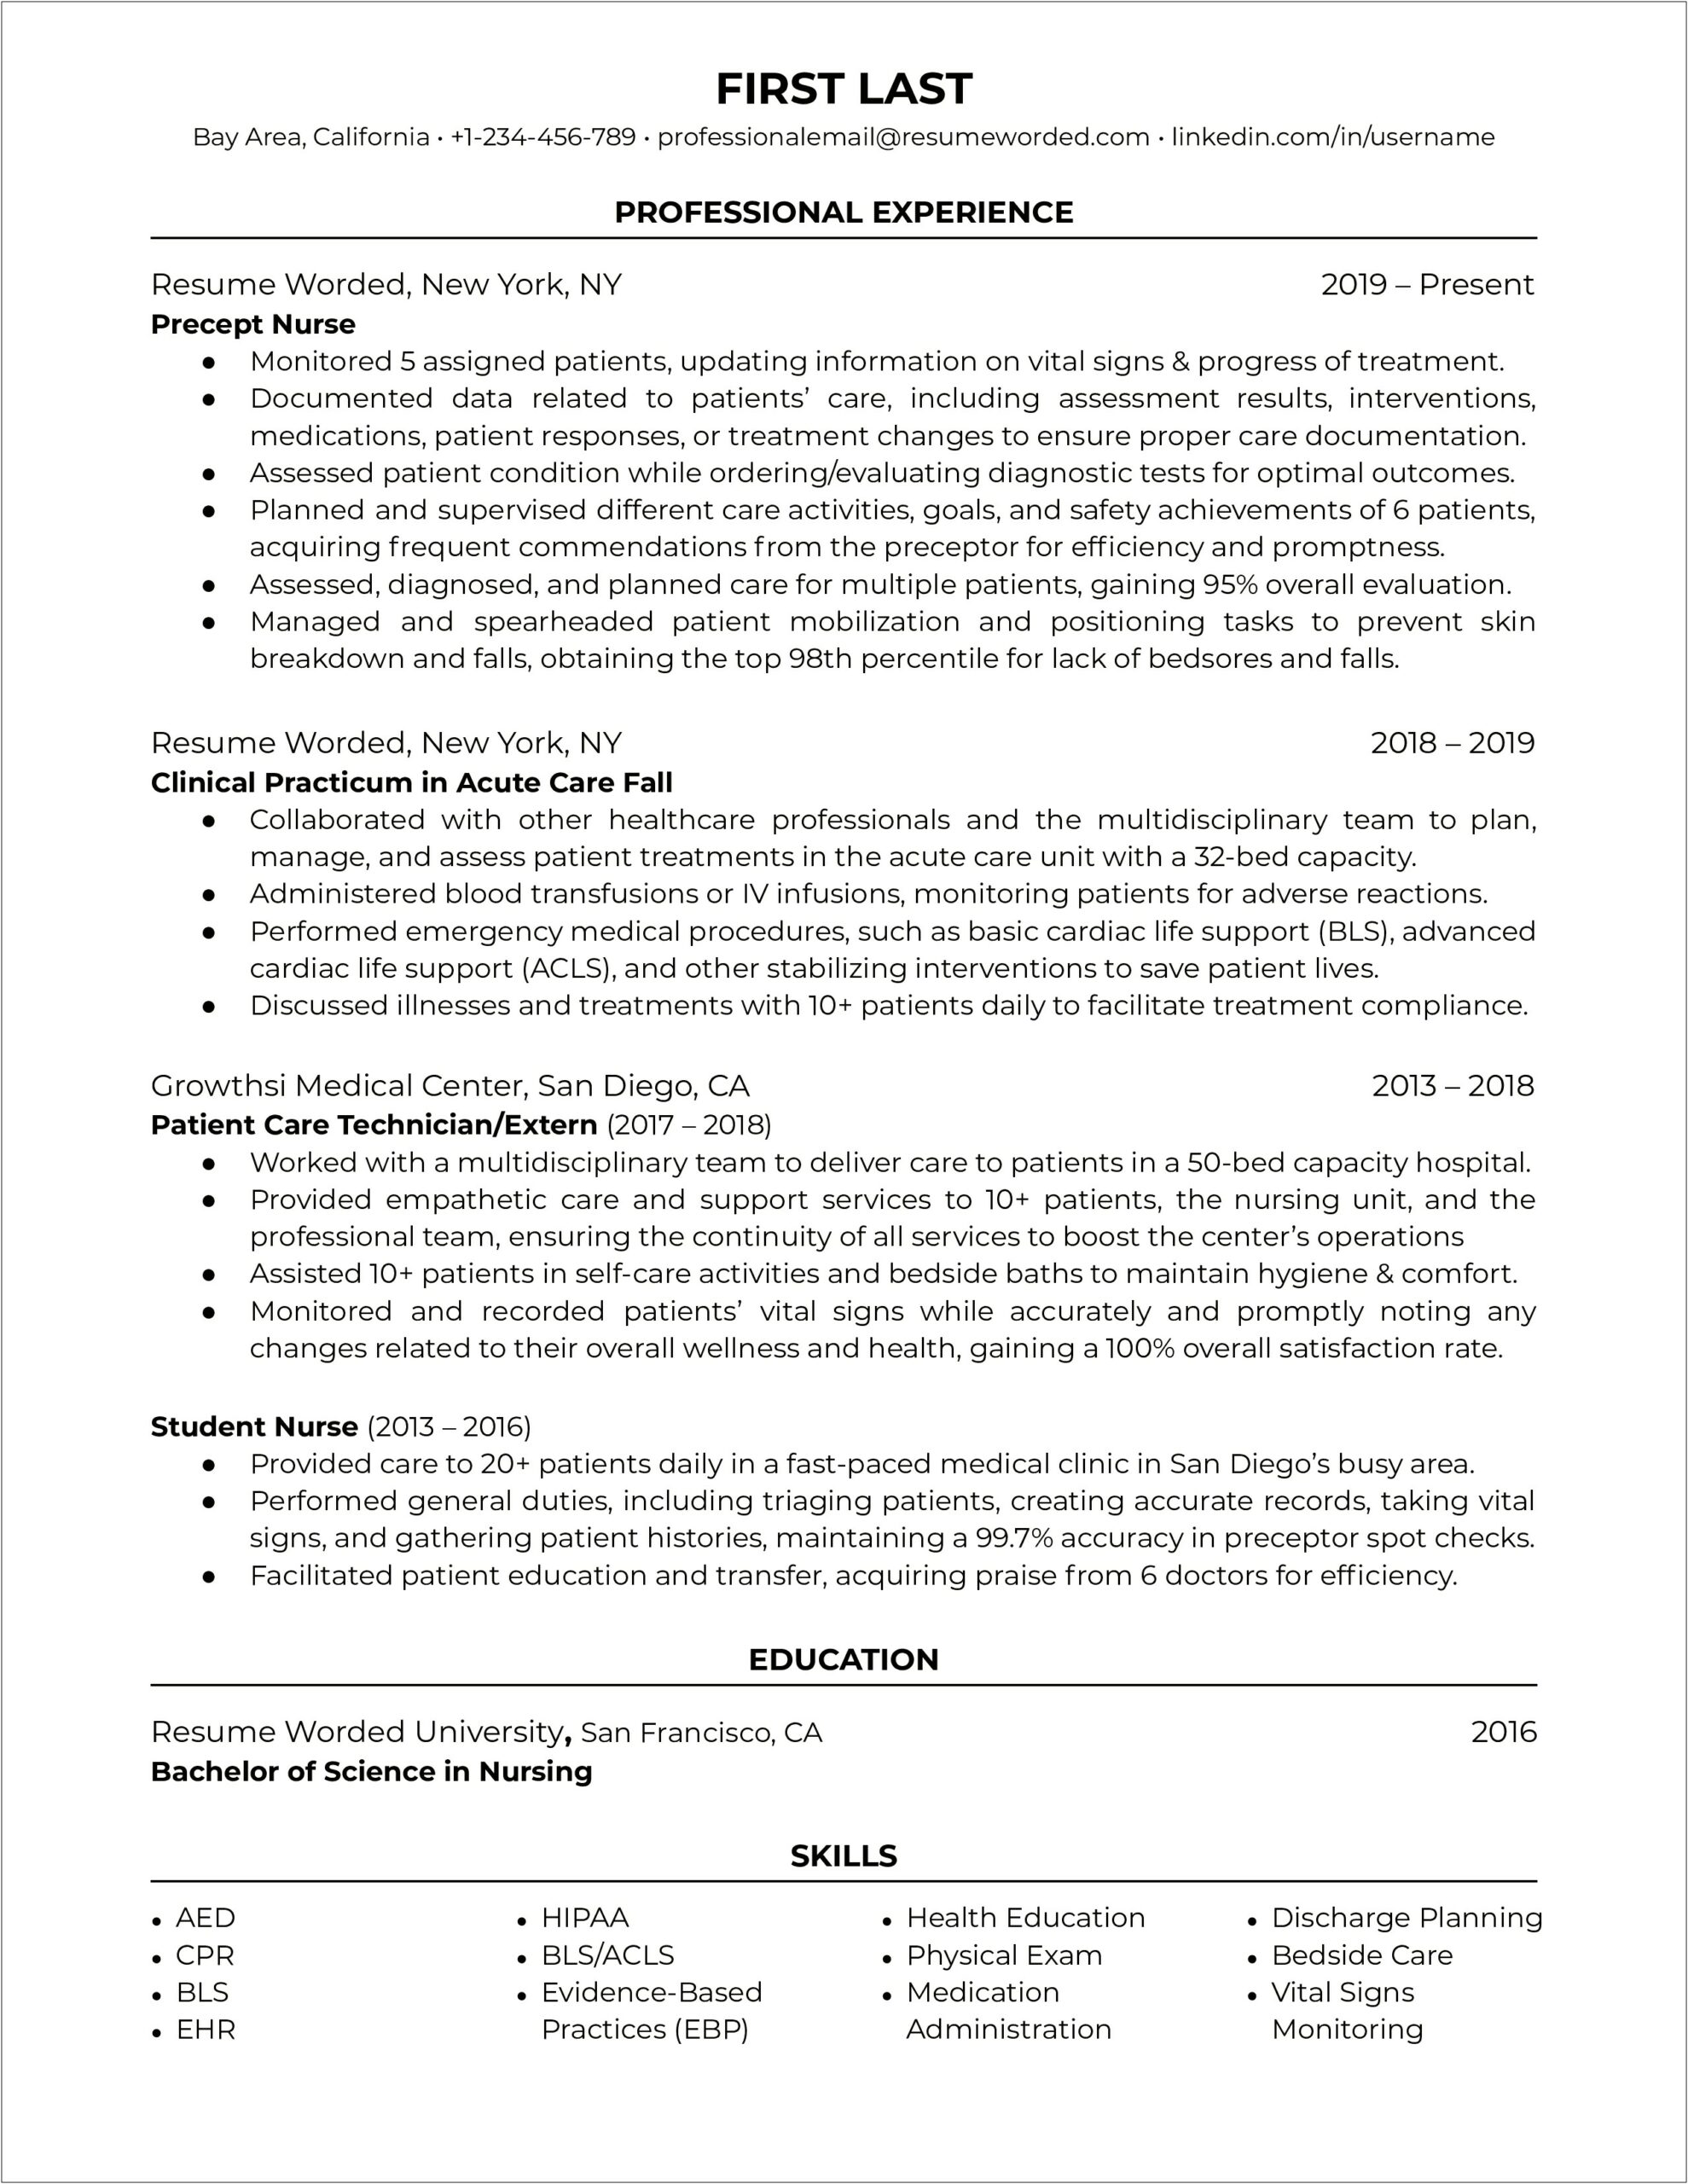 Resume Example For A Rn Student